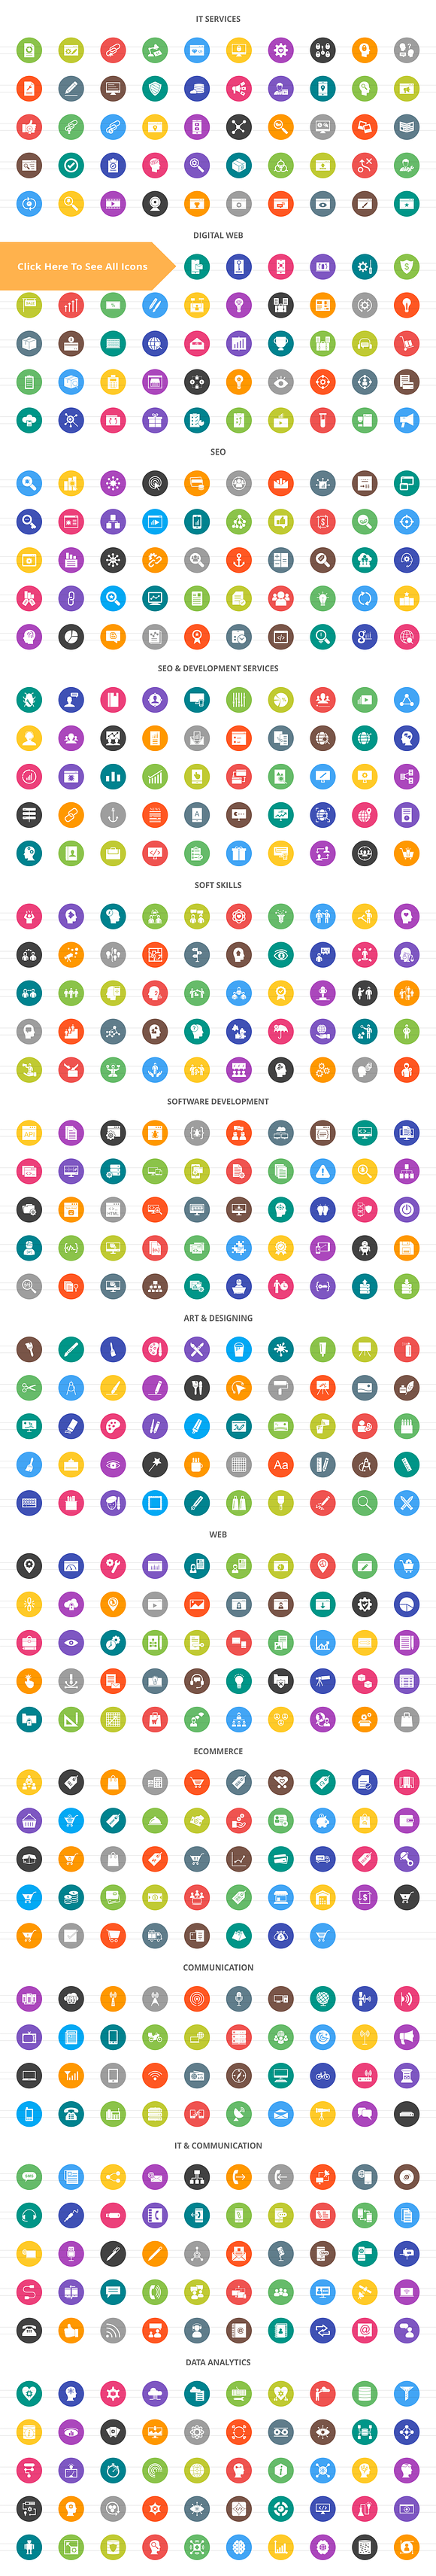 1779 Digital Filled Round Icons in Graphics - product preview 3